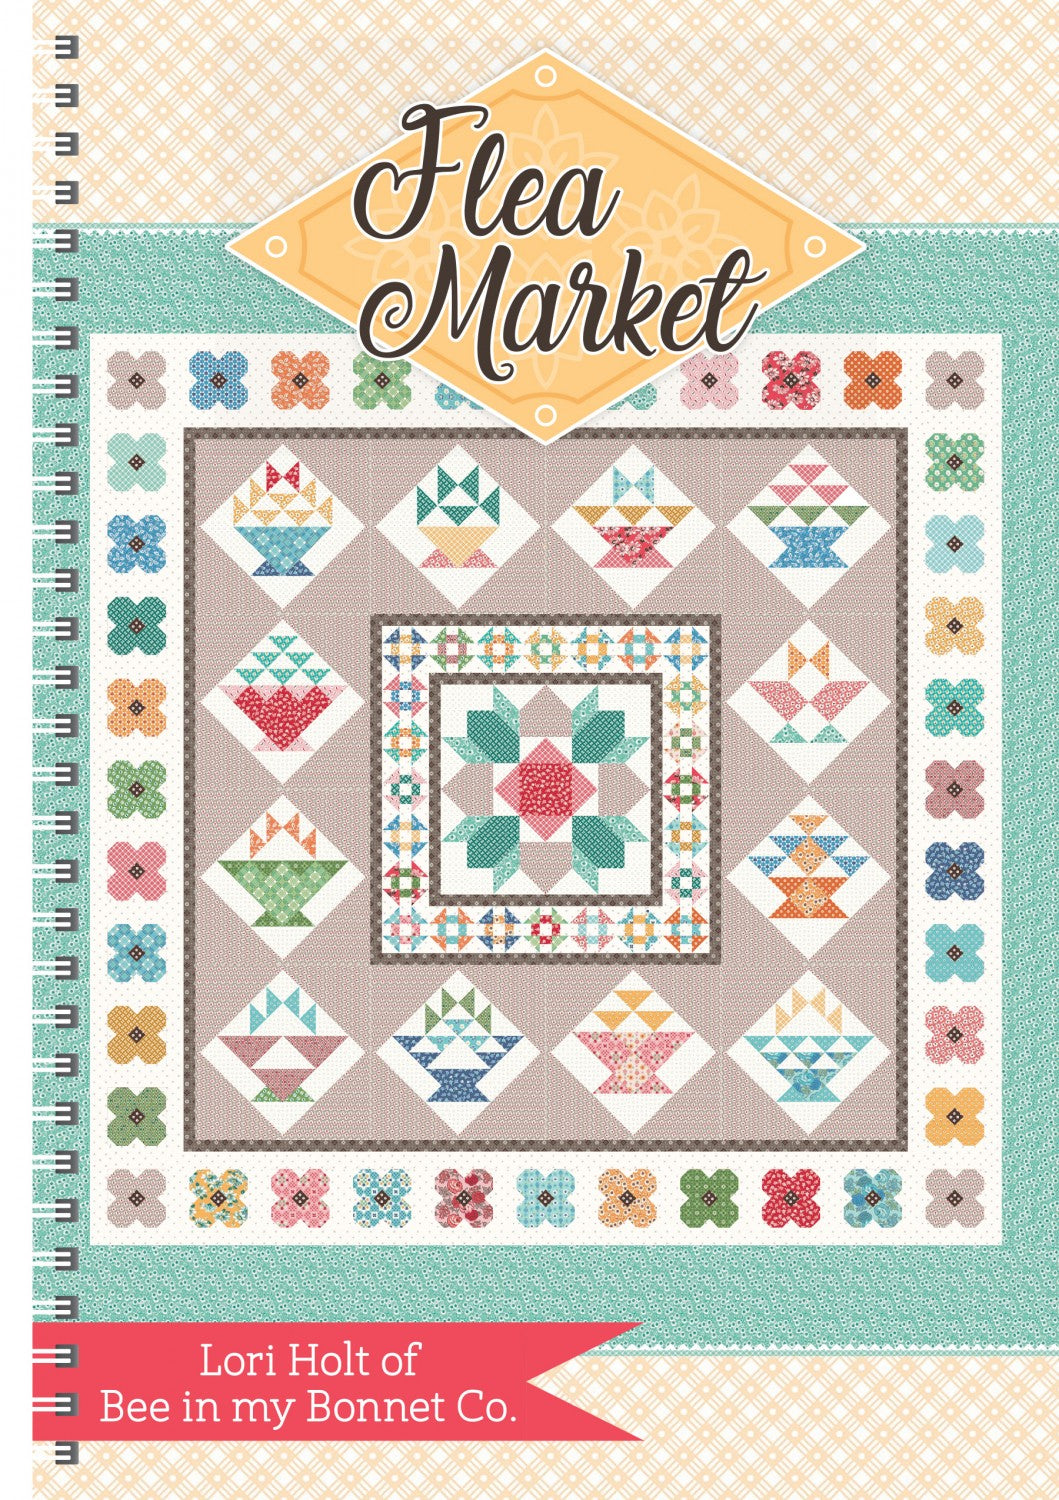 Flea Market Quilt Pattern Book by Lori Holt for It's Sew Emma